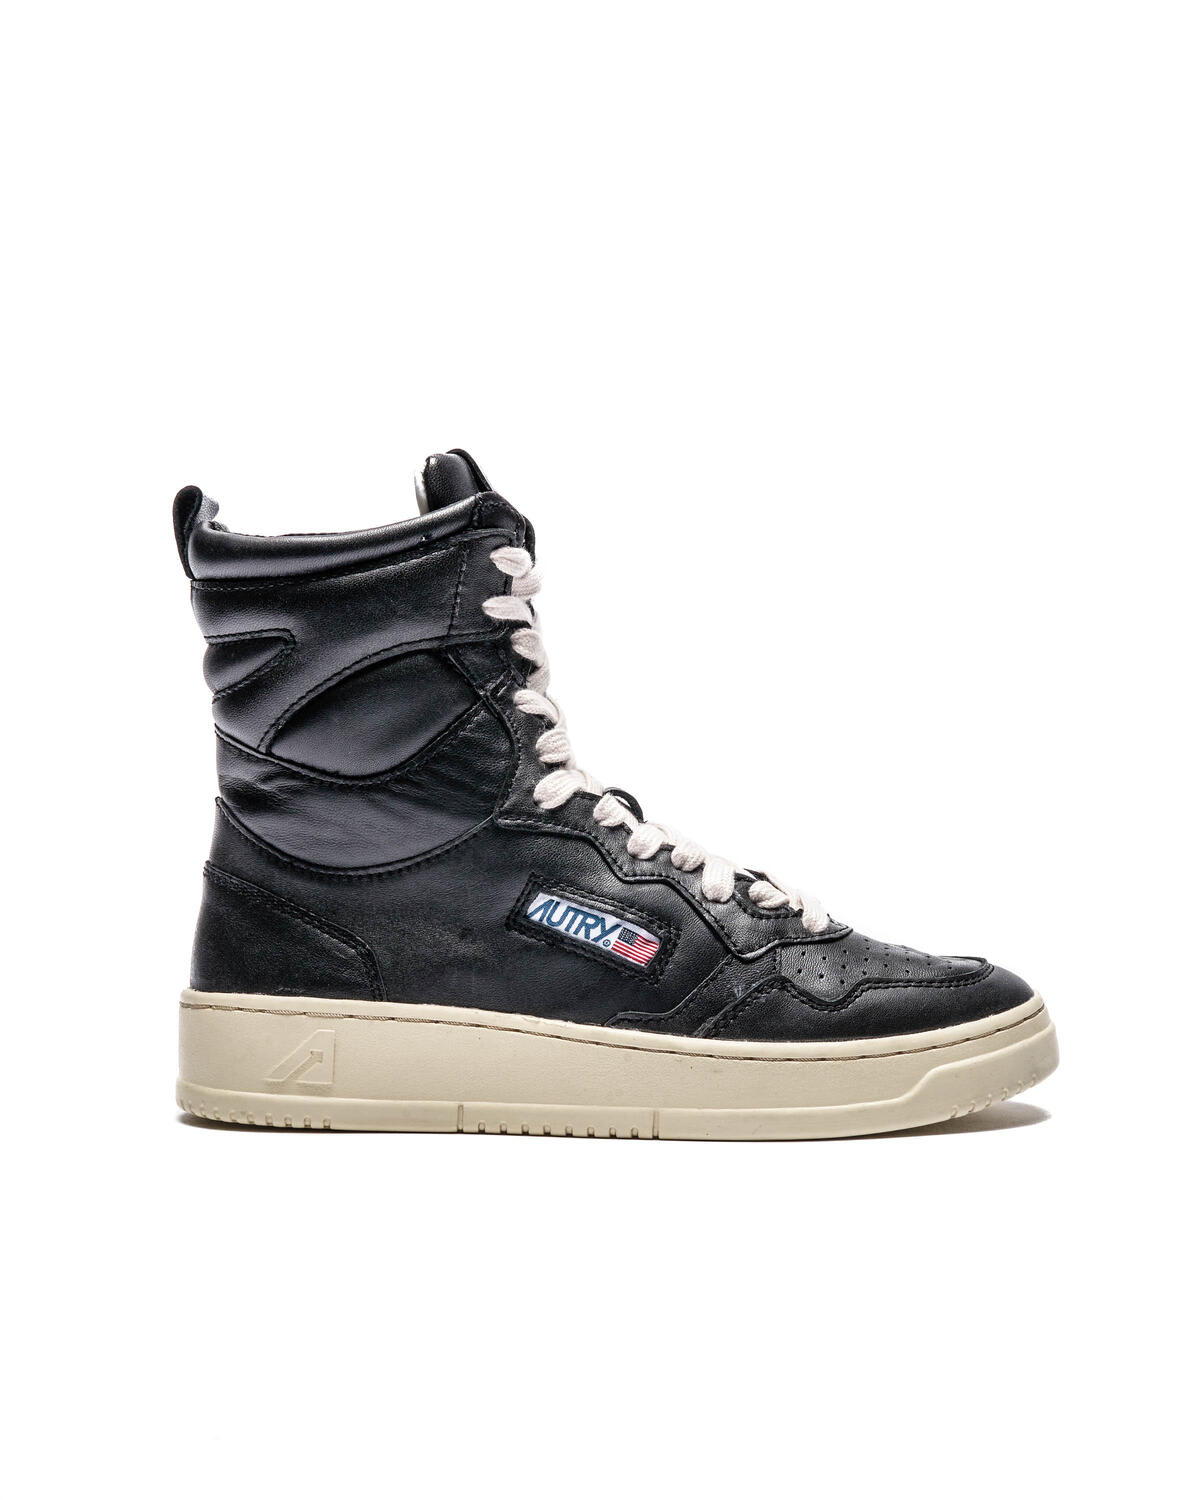 Autry Big One High Sneaker